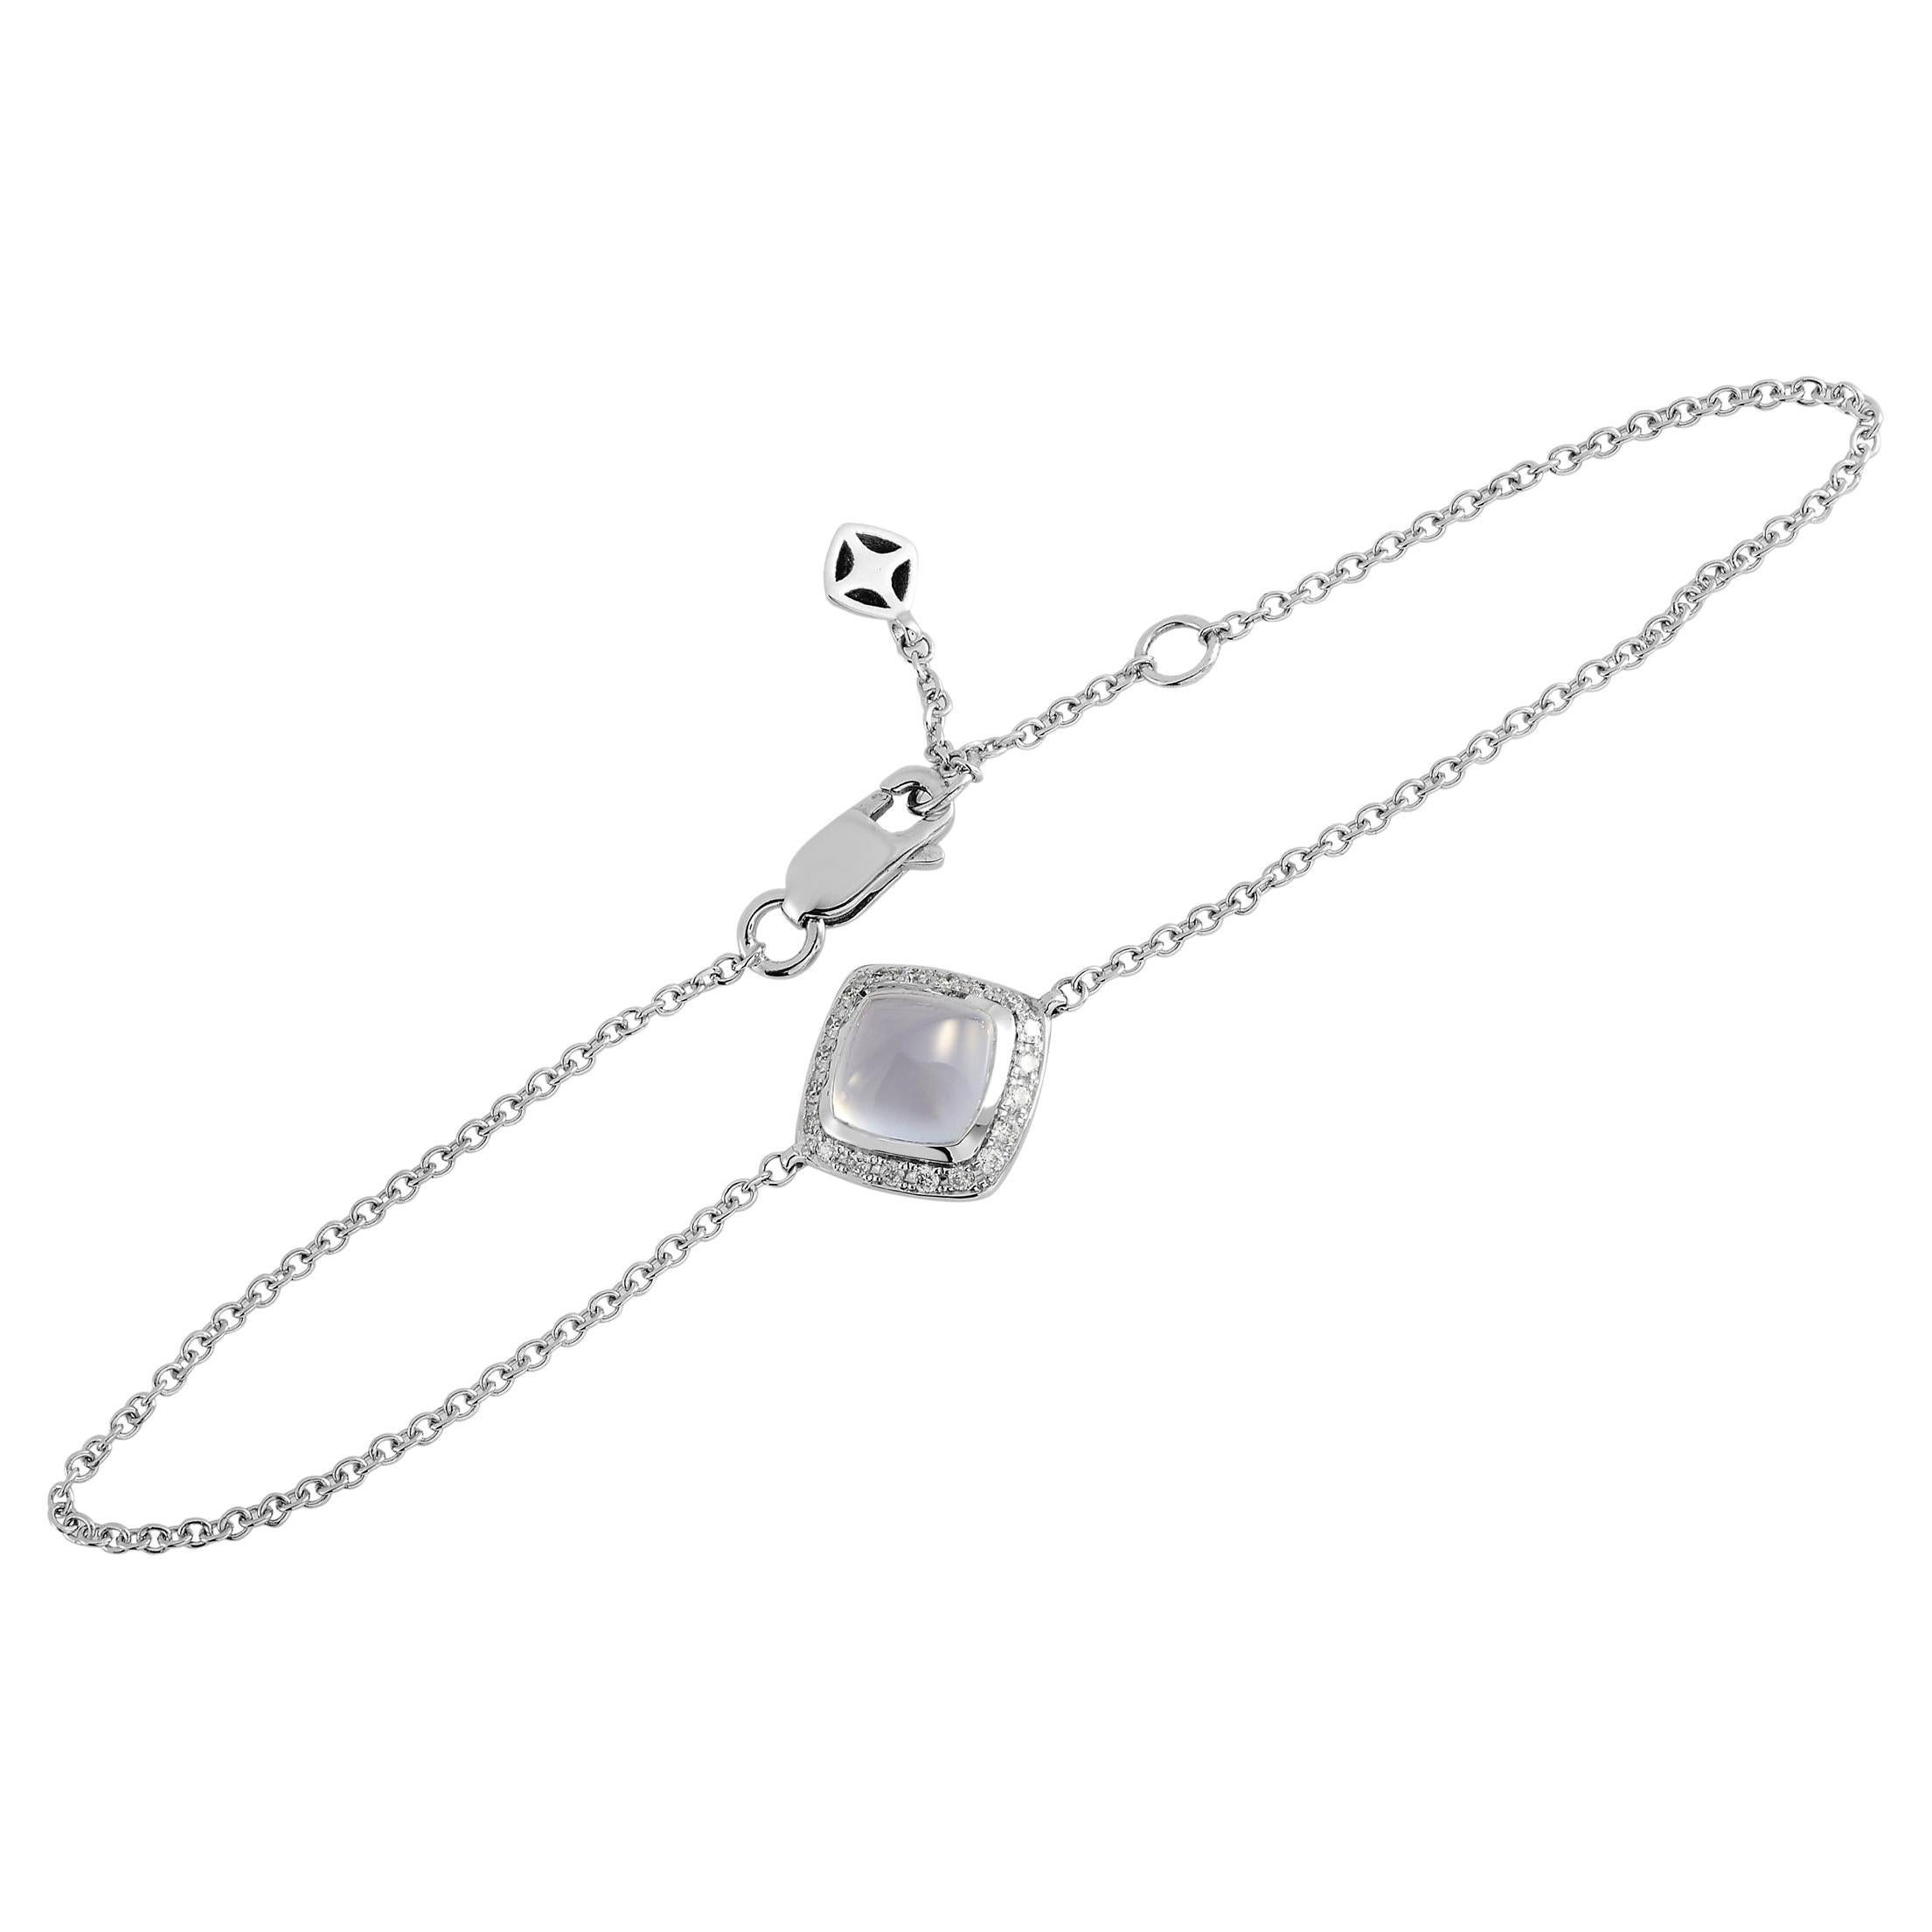 Fred of Paris Pain De Sucre 18K White Gold 0.10 Ct Diamond and Chalcedony